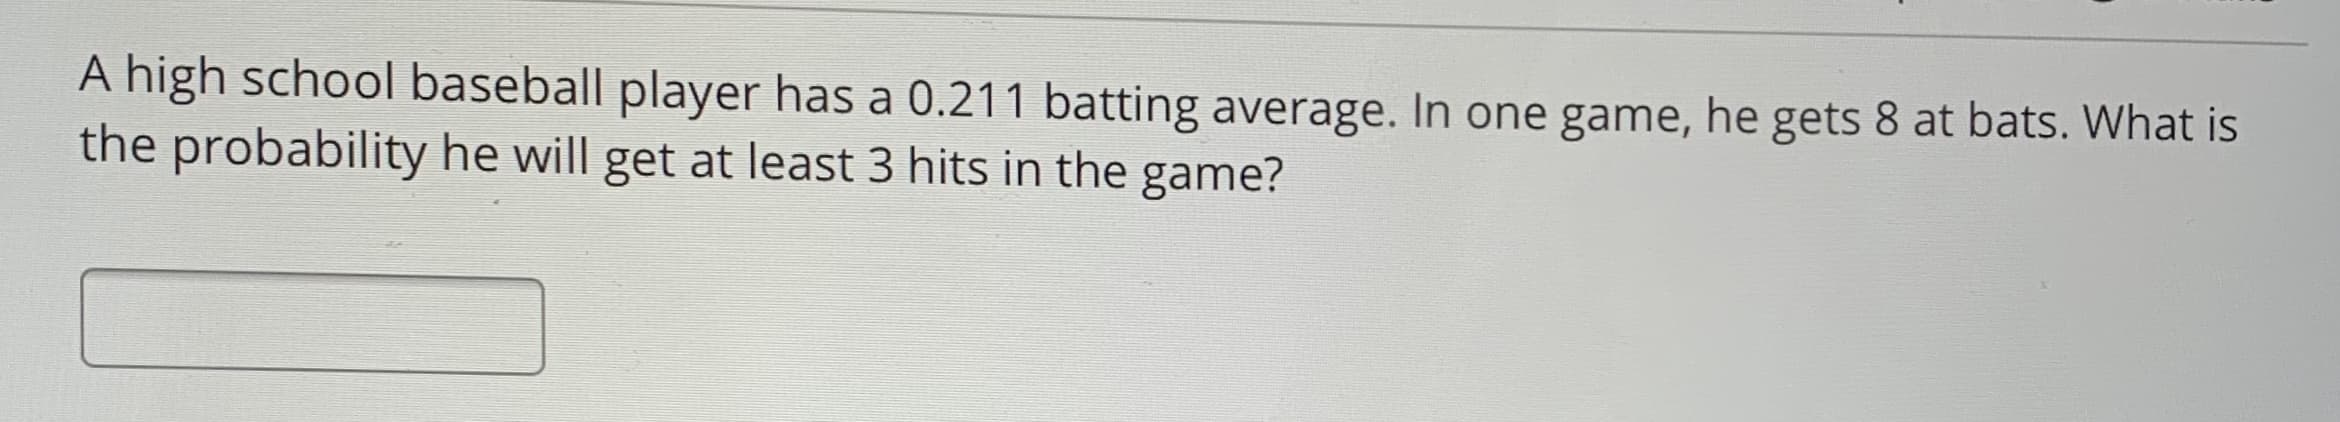 A high school baseball player has a 0.211 batting average. In one game, he gets 8 at bats. What is
the probability he will get at least 3 hits in the game?
